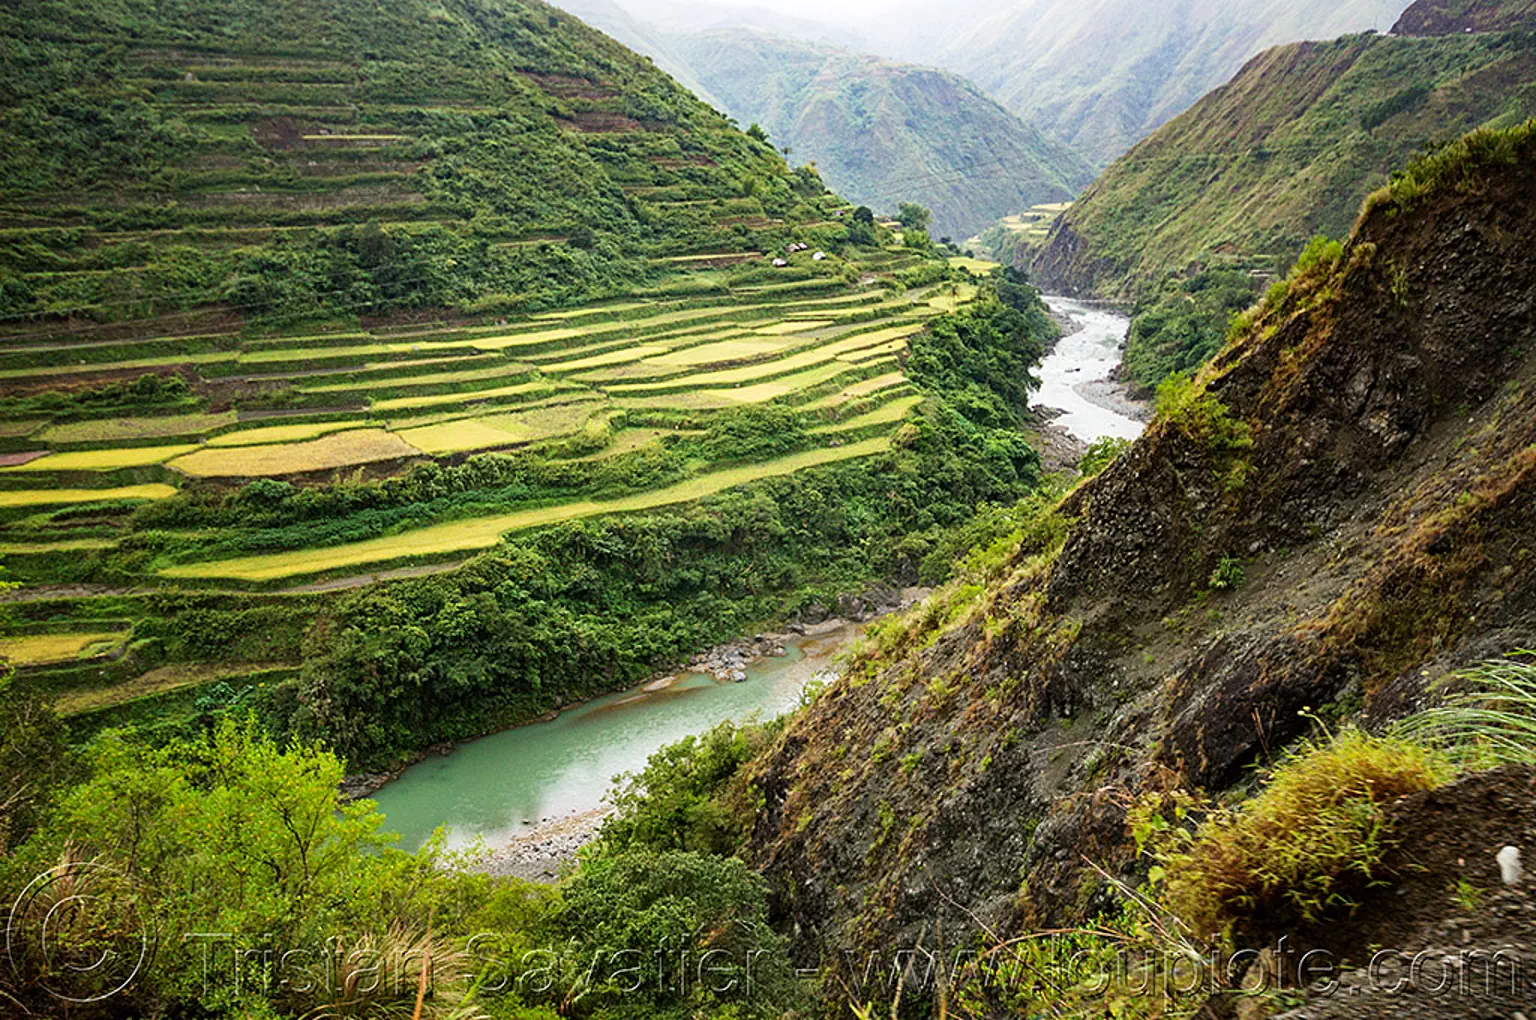 rice terraces in steep valley in the cordillera - chico river (philippines), agriculture, chico river, chico valley, cordillera, philippines, rice paddies, rice paddy fields, terrace farming, terraced fields